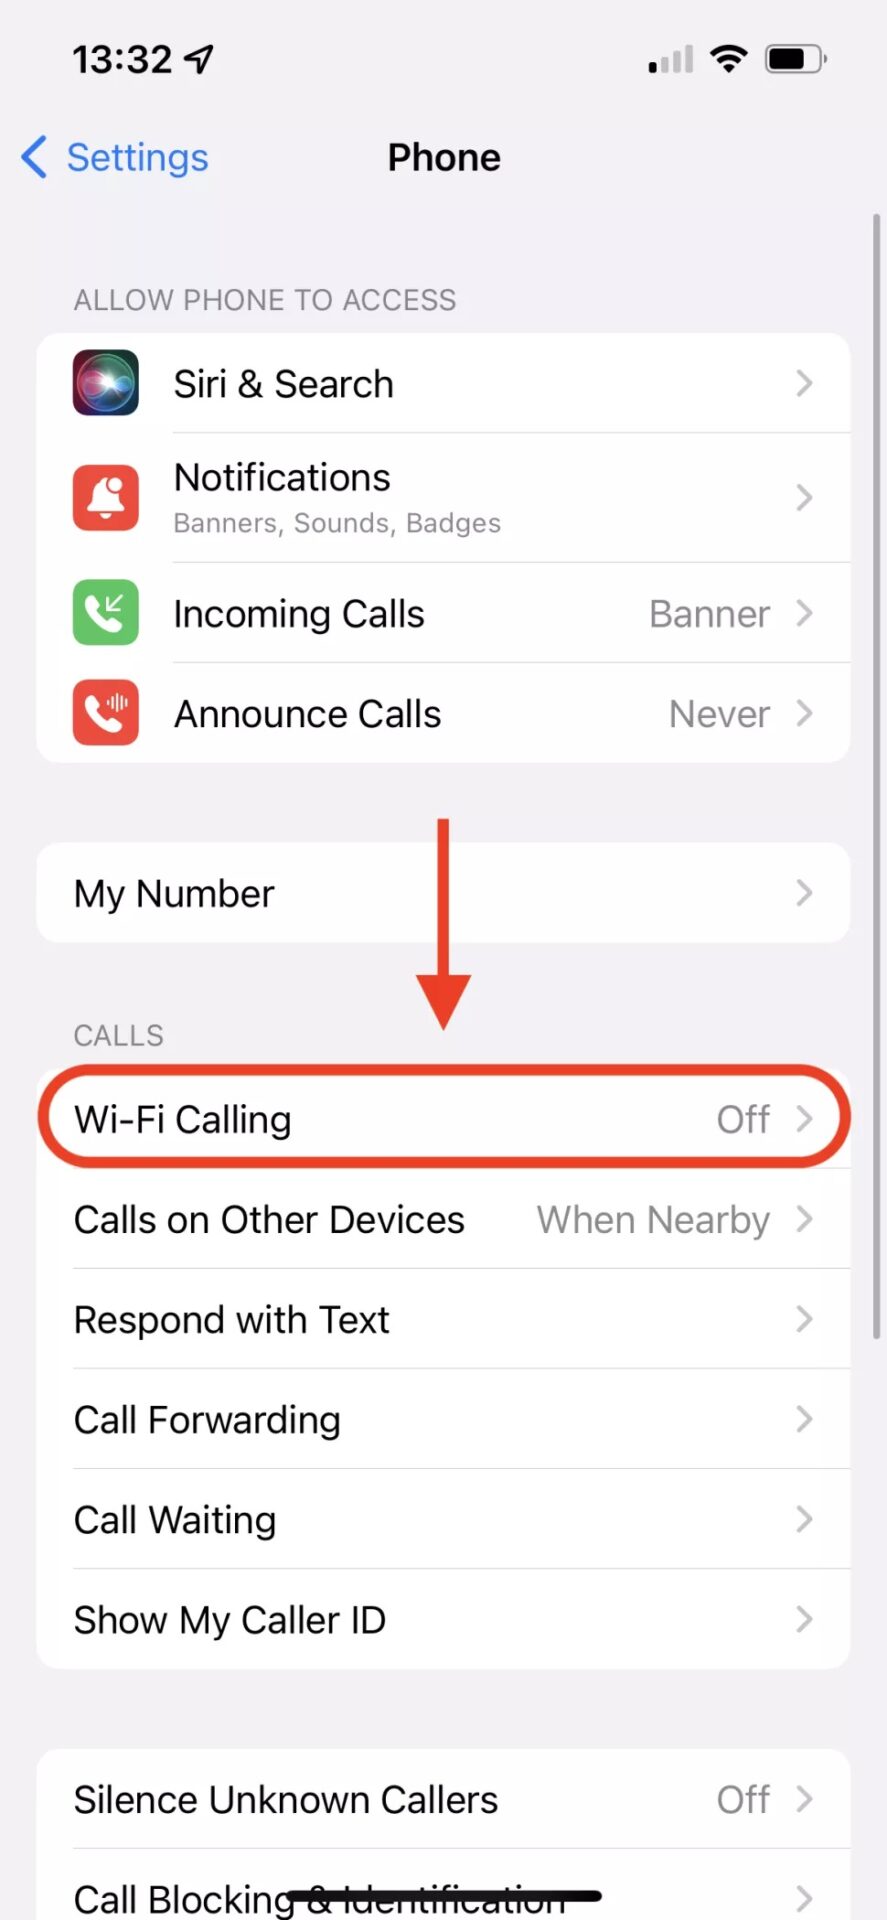 Enabling Wi-Fi Calling: Activating the Wi-Fi Calling Feature